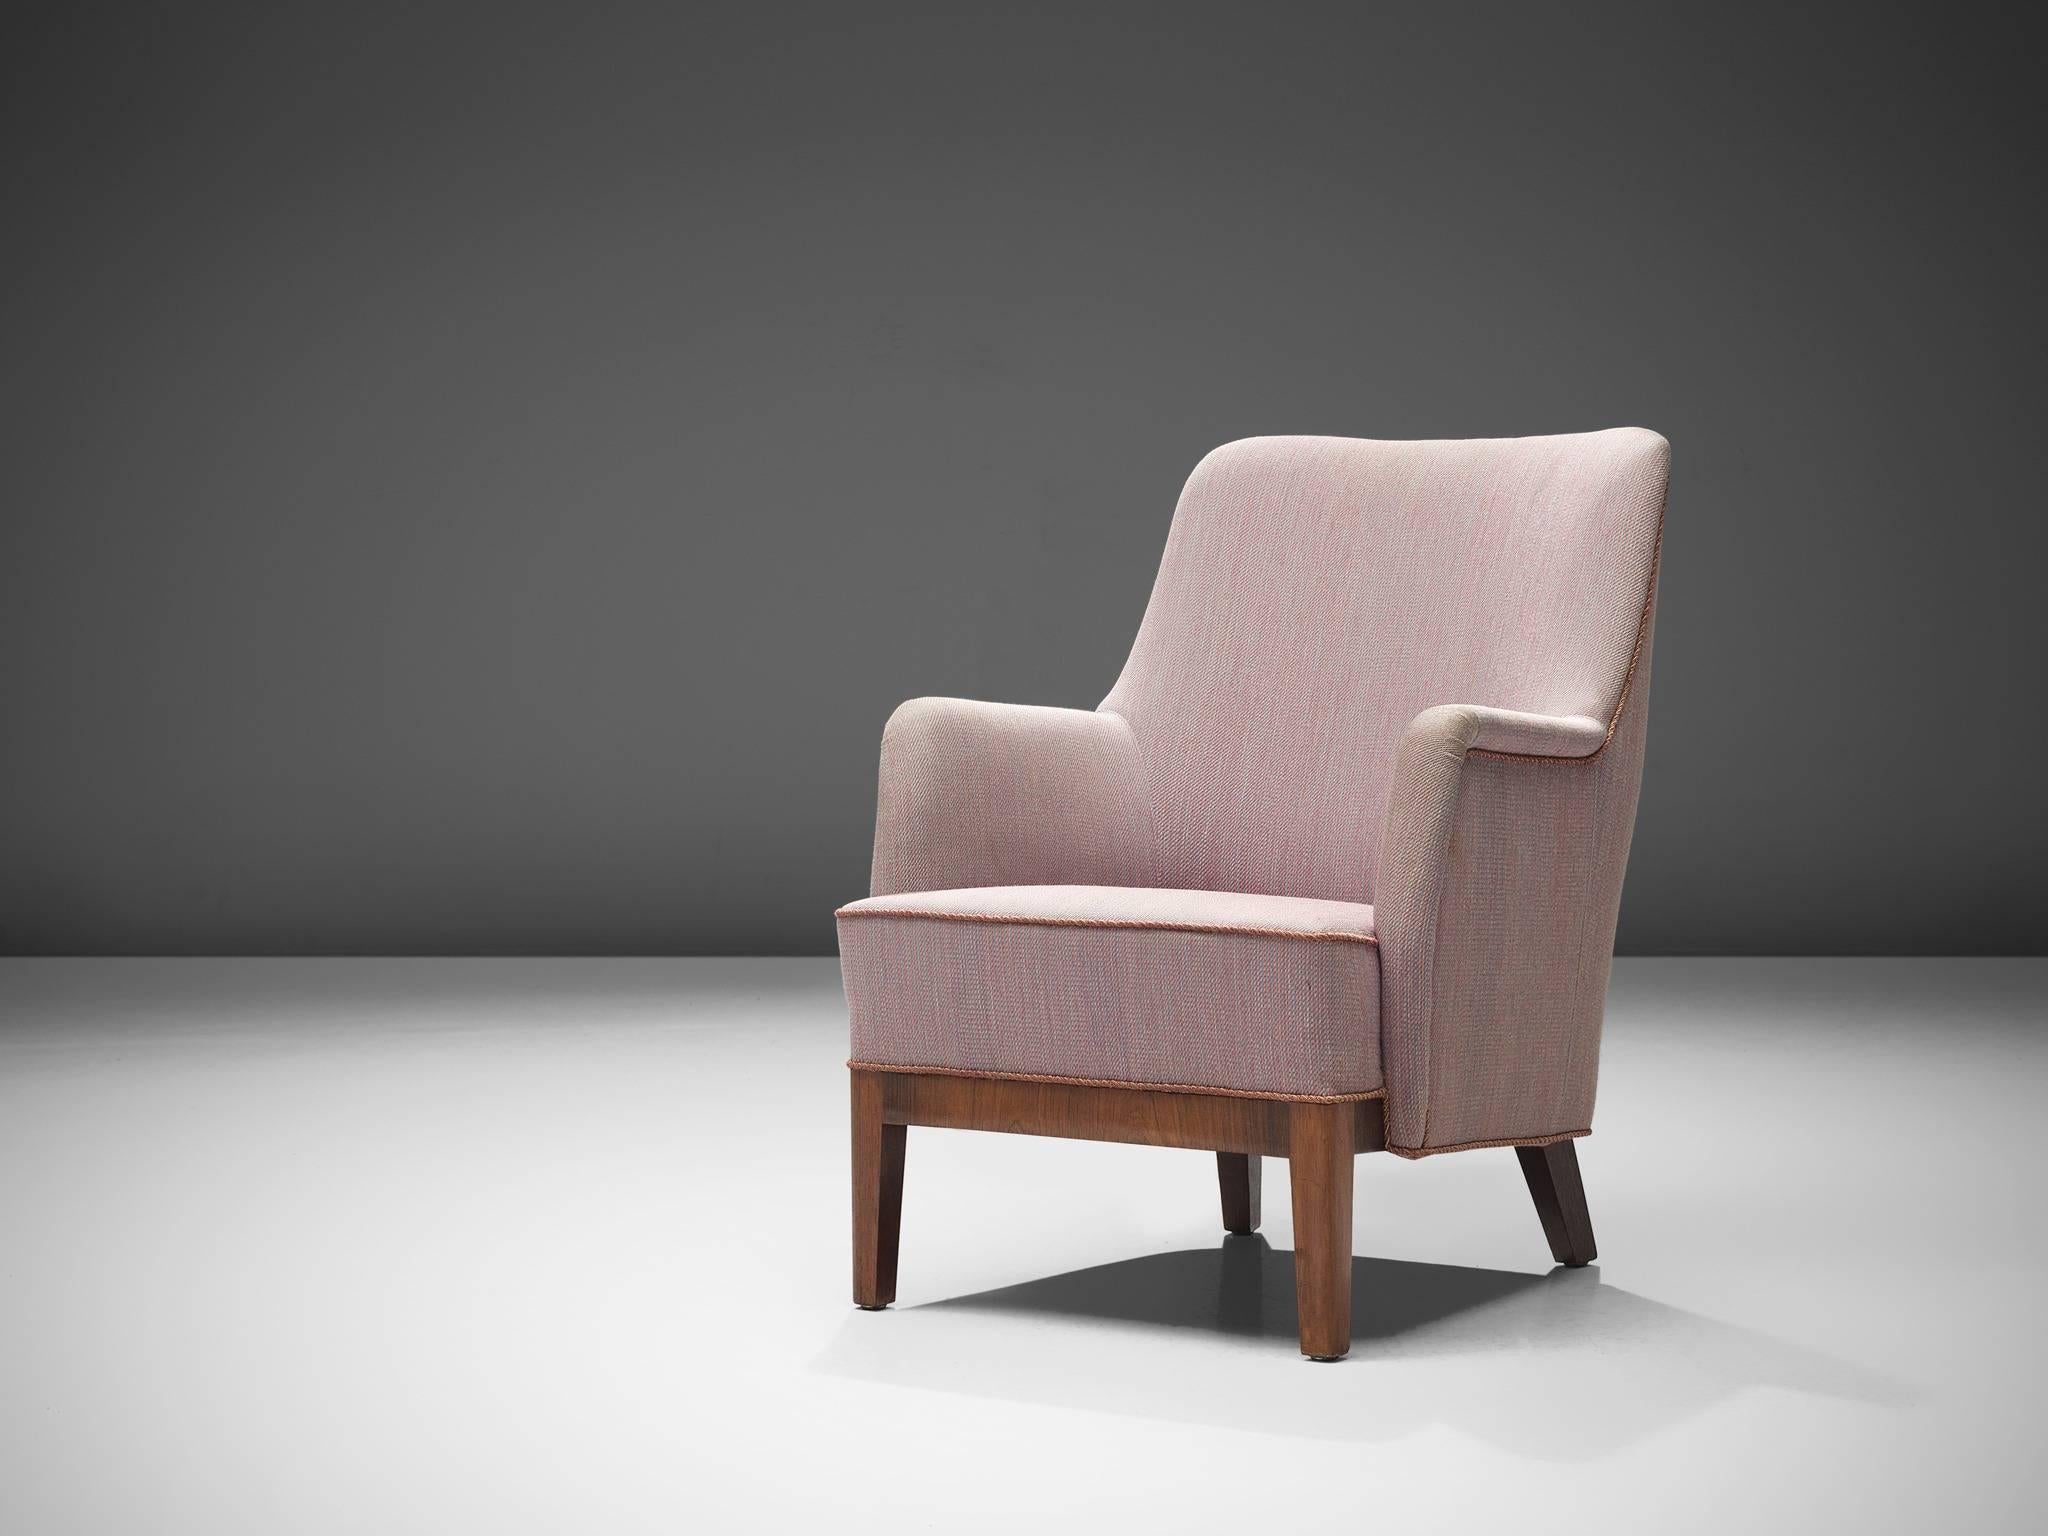 Armchair pink wool fabric rosewood, Denmark, 1960s.

This classic highback armchair show refined Danish craftsmanship and aesthetics. The backs feature a slightly tilted back and comfortable pink seating and back, as can be expected from Danish